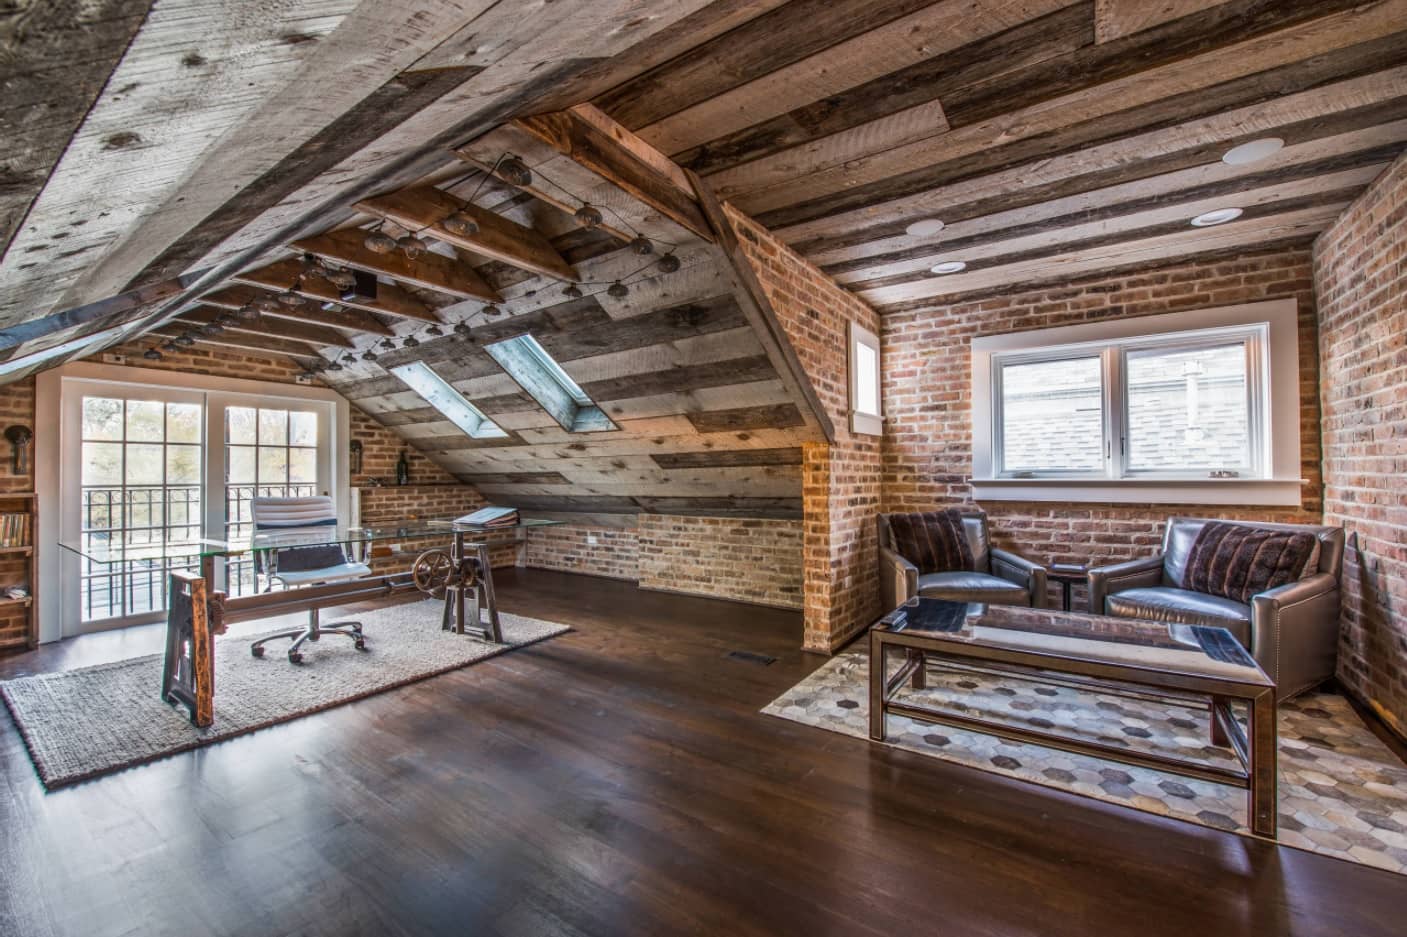 Large loft space at the attic with unusual decoration